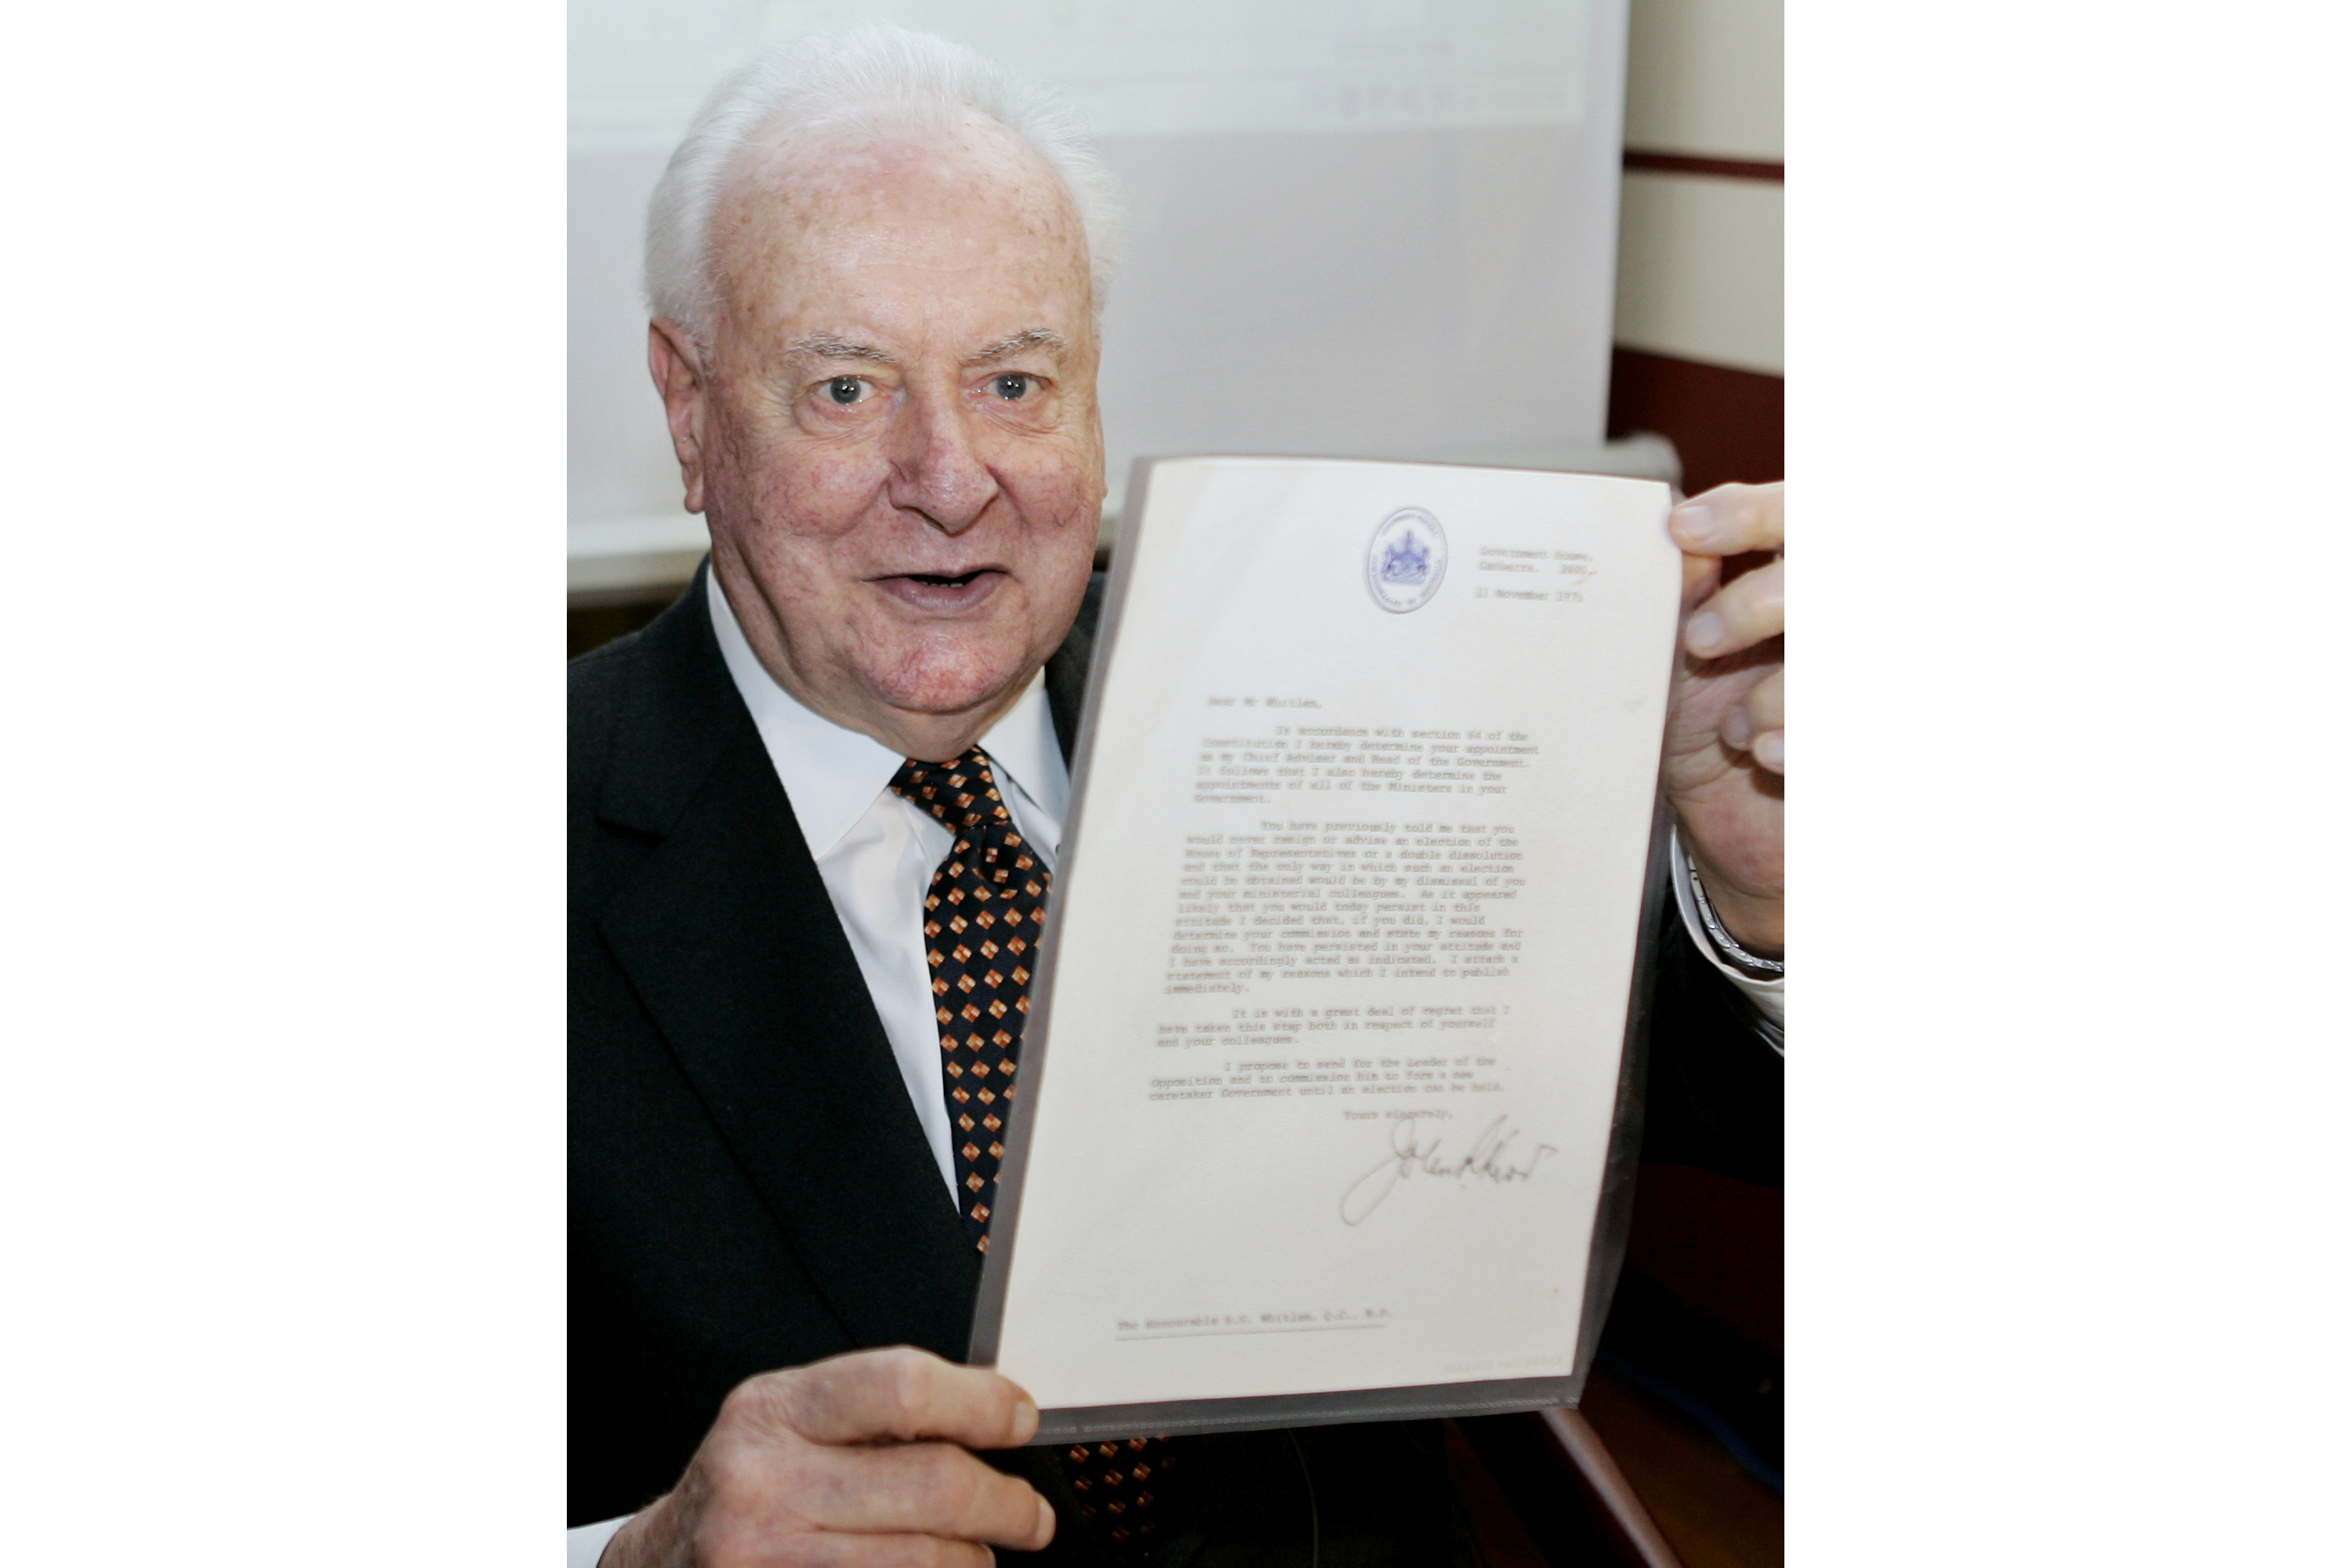 Former Australian prime minister Gough Whitlam holding up the original copy of his dismissal letter he received from then Governor-General Sir John Kerr on November 11, 1975, at a book launch in Sydney.